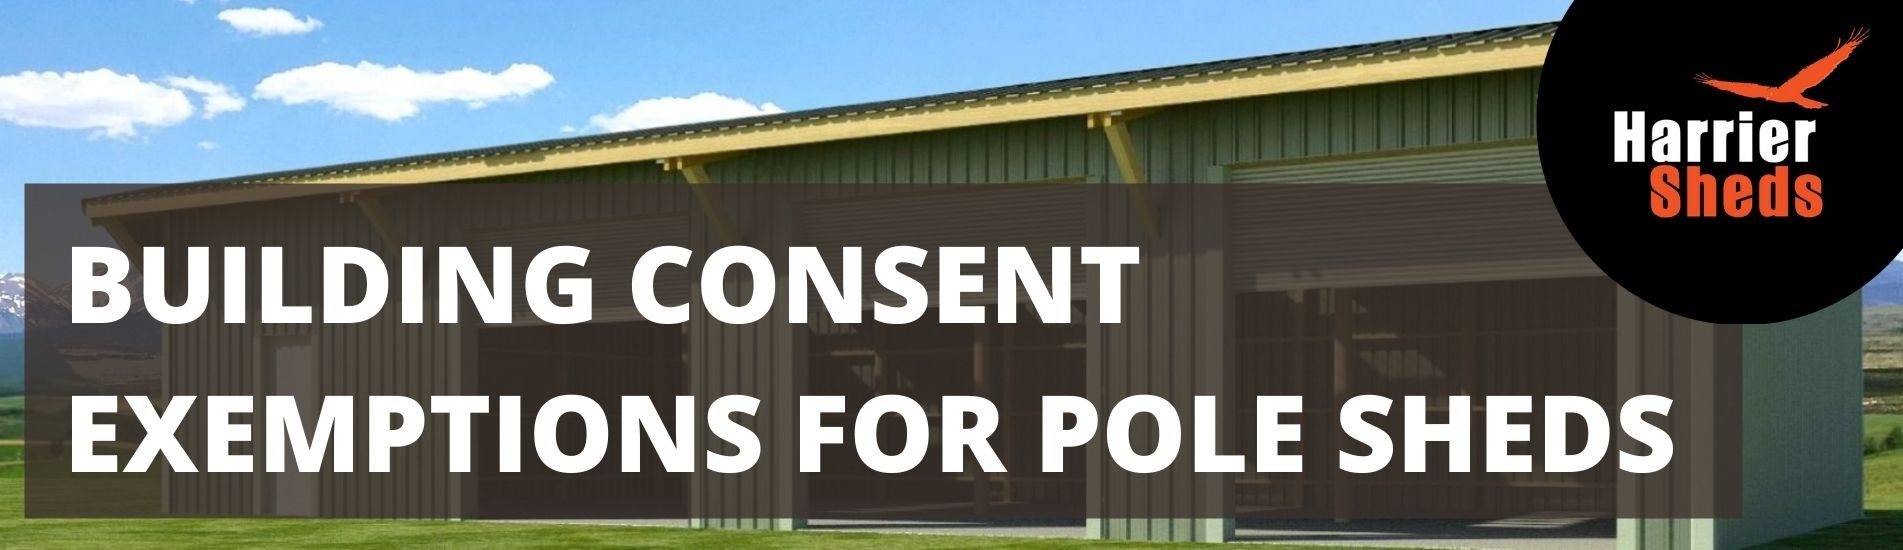 Building Consent Exemptions for Pole Sheds Banner